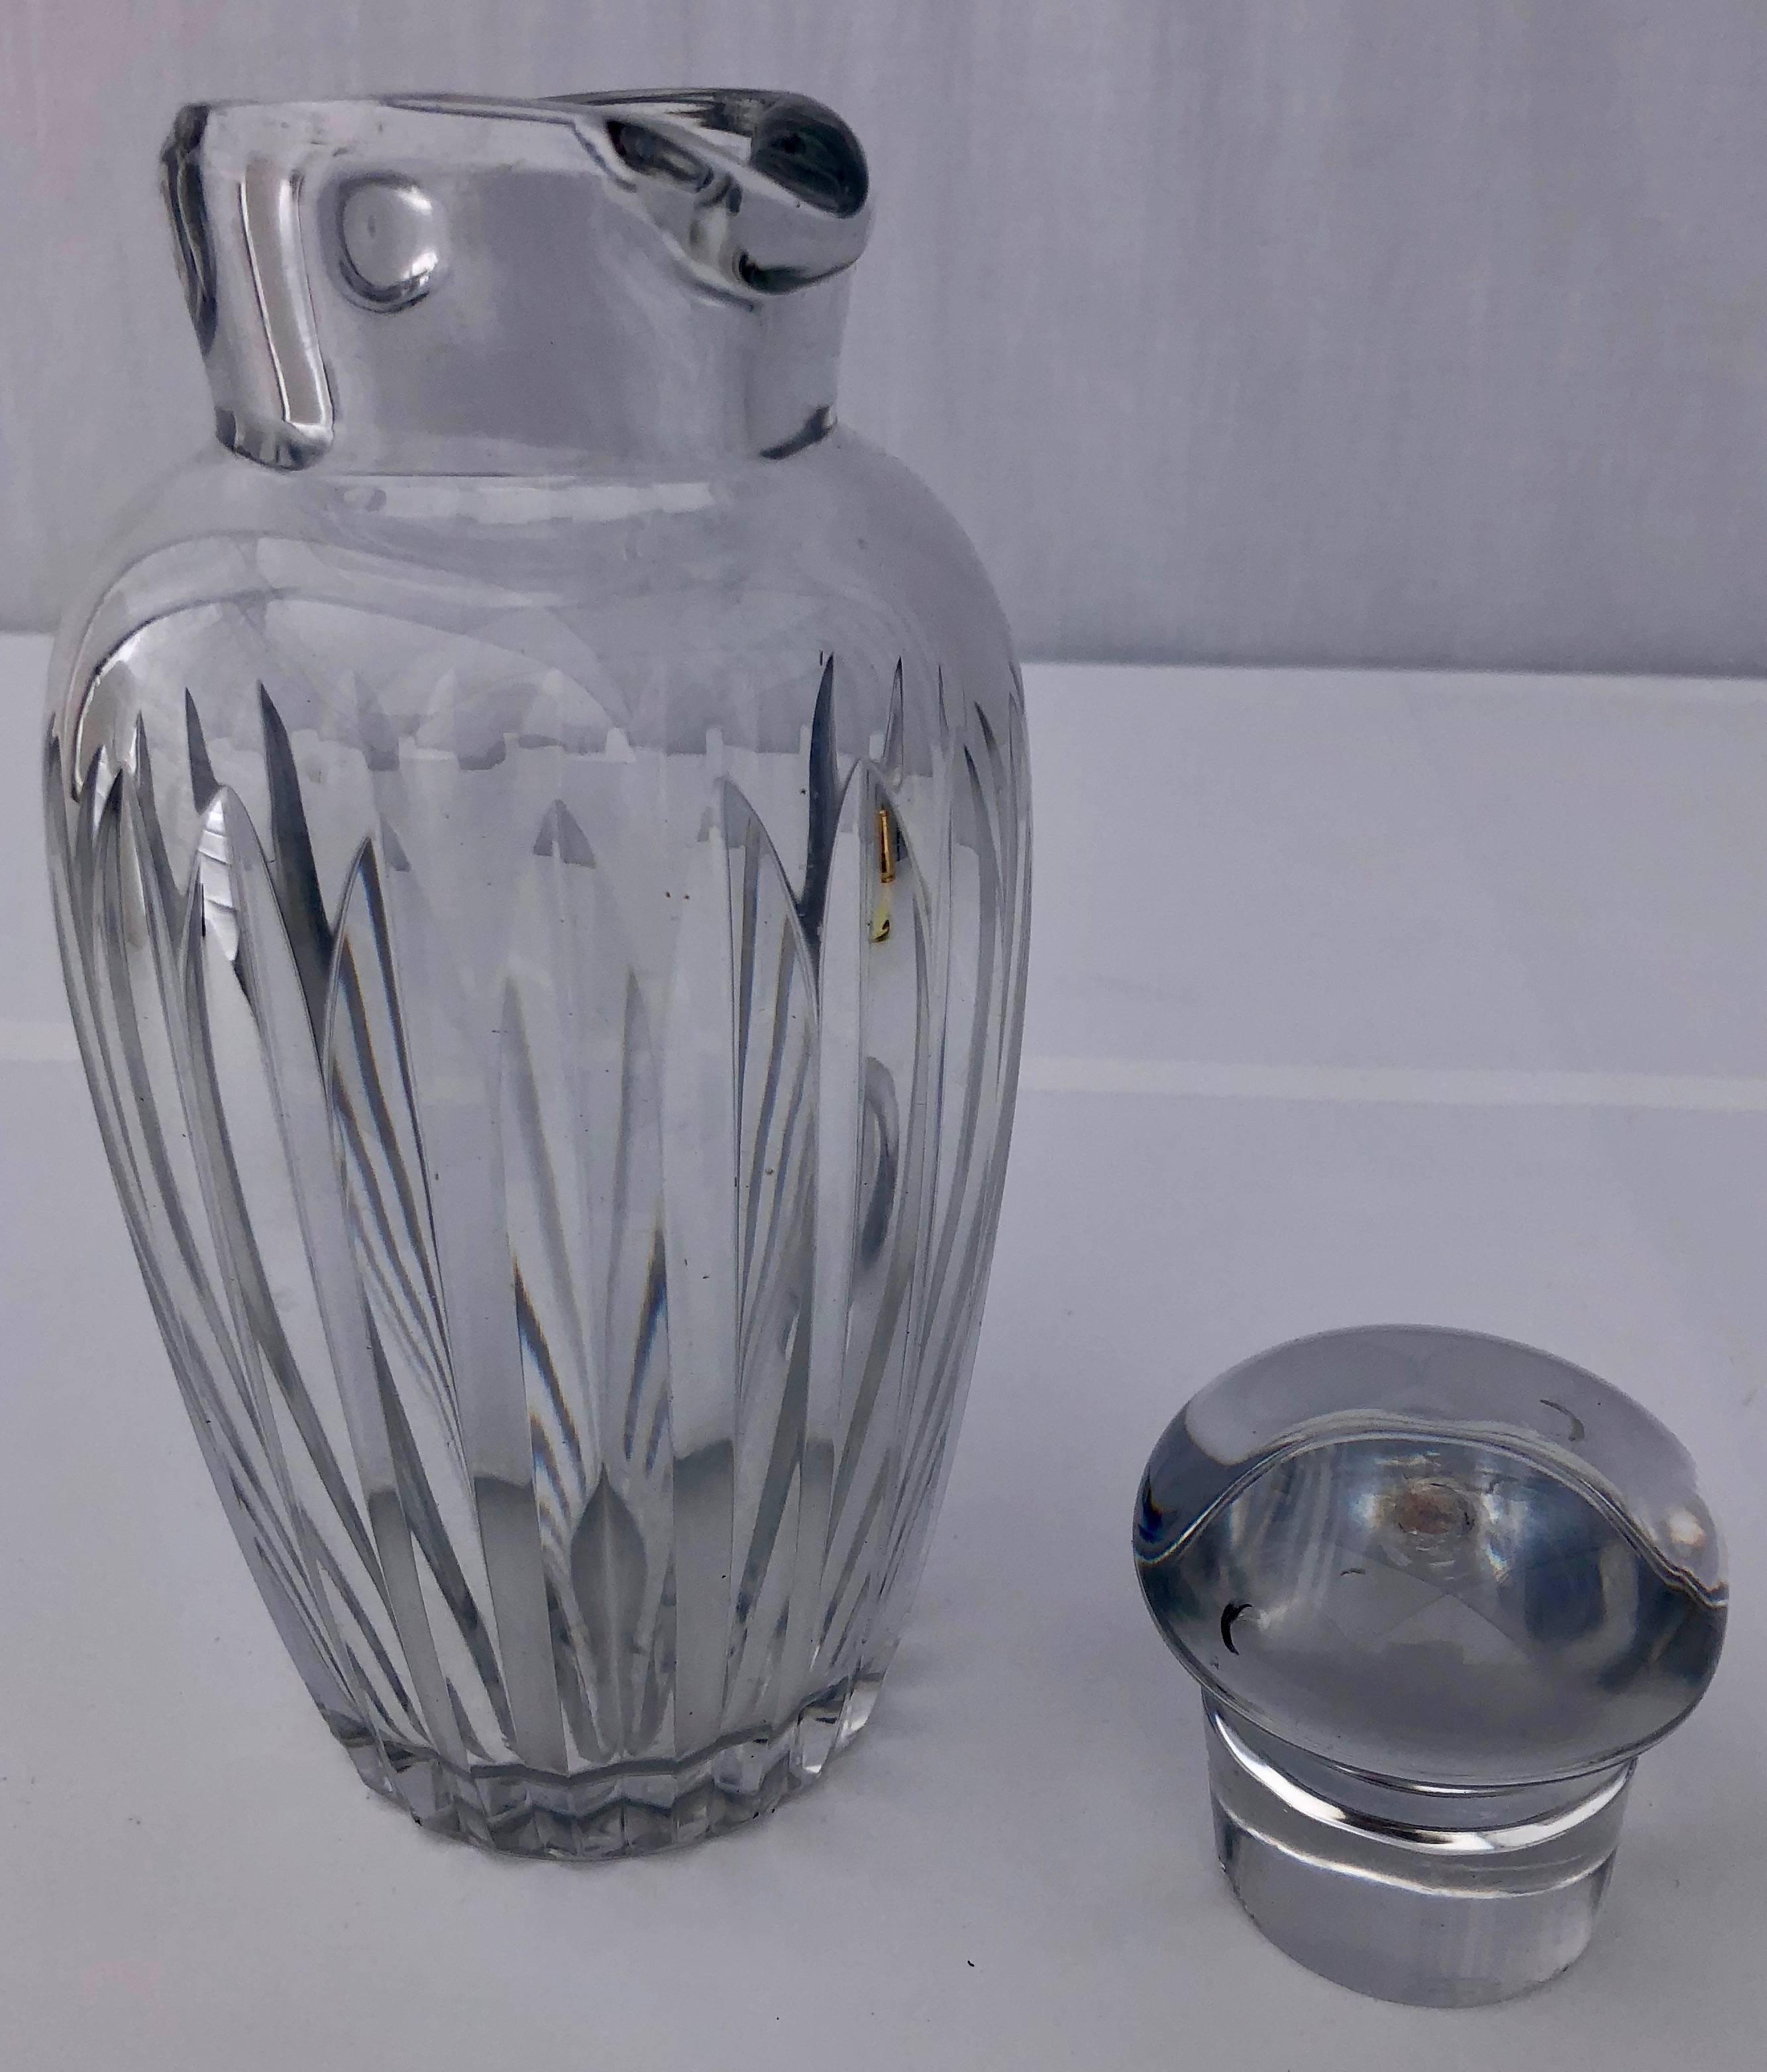 This lovely French Baccarat crystal whisky carafe (decanter) has two spouts and a dome shaped lid and the Baccarat seal underneath the carafe in the center.
 